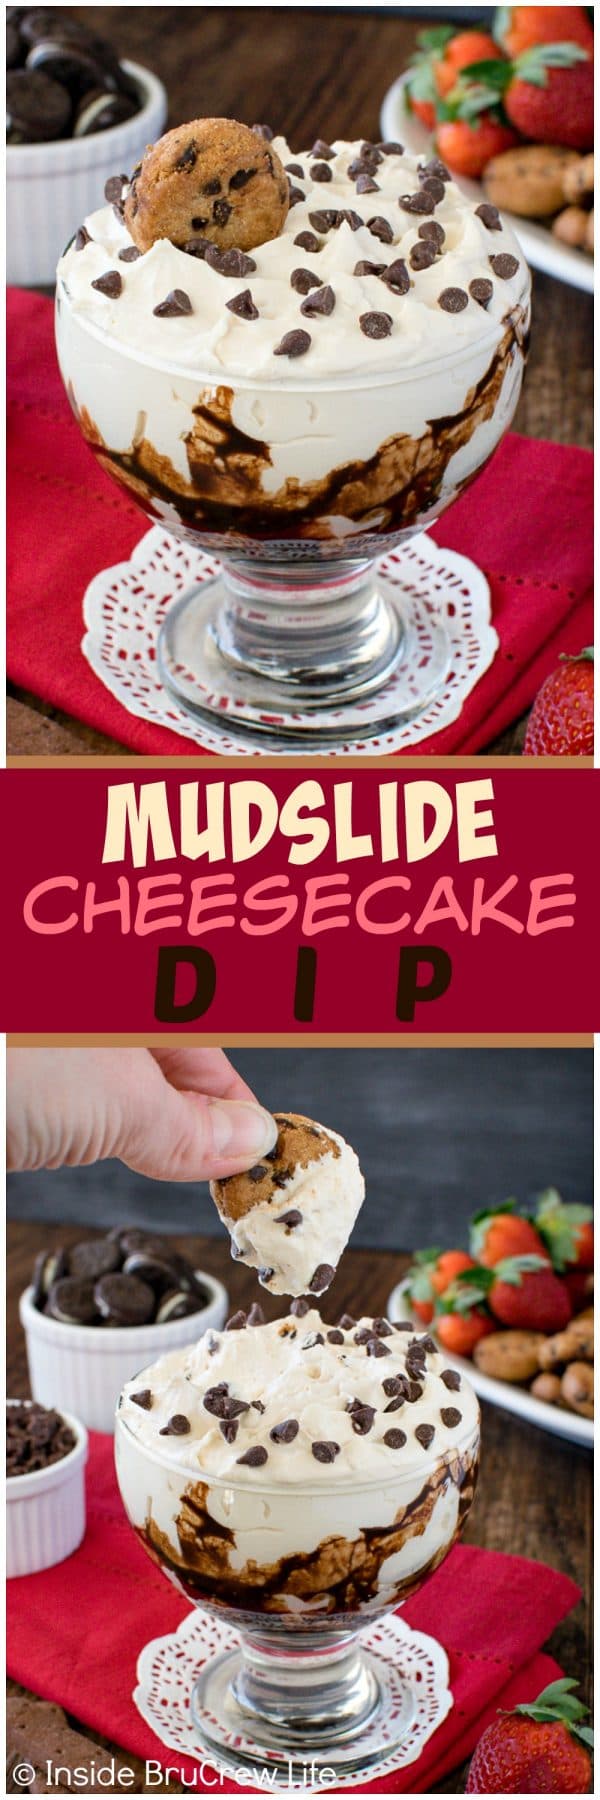 Mudslide Cheesecake Dip - this easy and creamy cheesecake dip tastes and looks just like your favorite drink! Try it with cookies and fruit for a fun dessert! Adult and kid friendly options in the recipe!